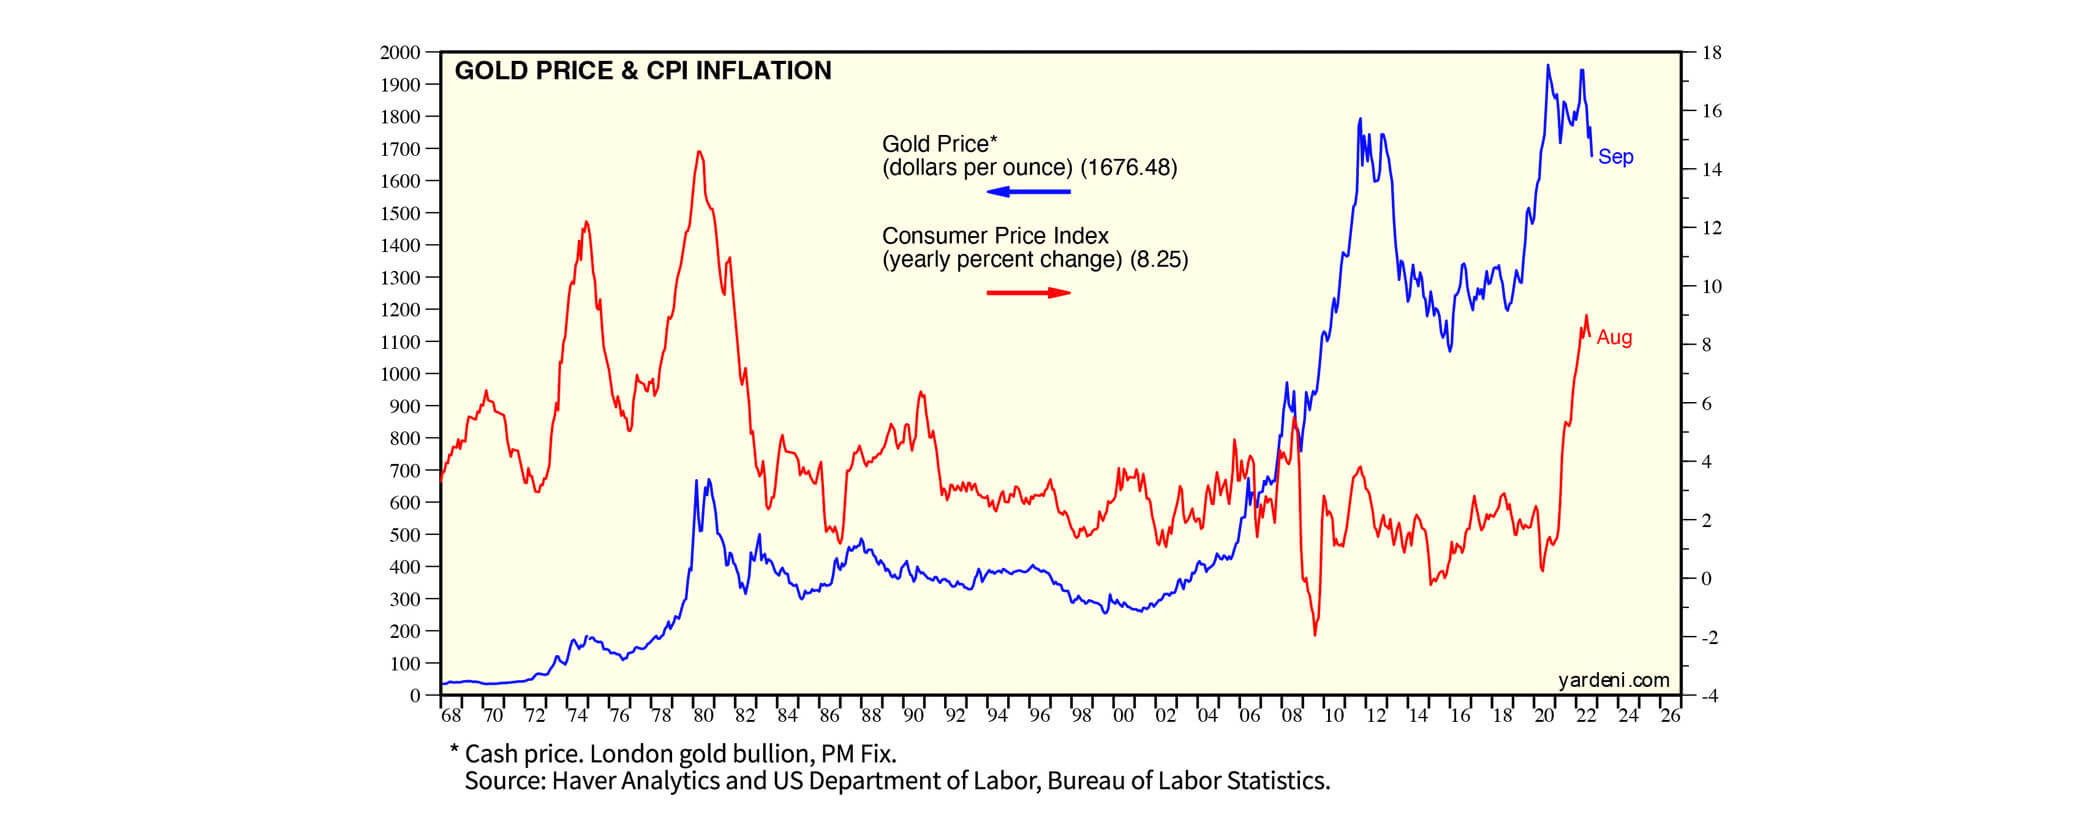 A graph comparing the Gold Price and the CPI Inflation to each other.
